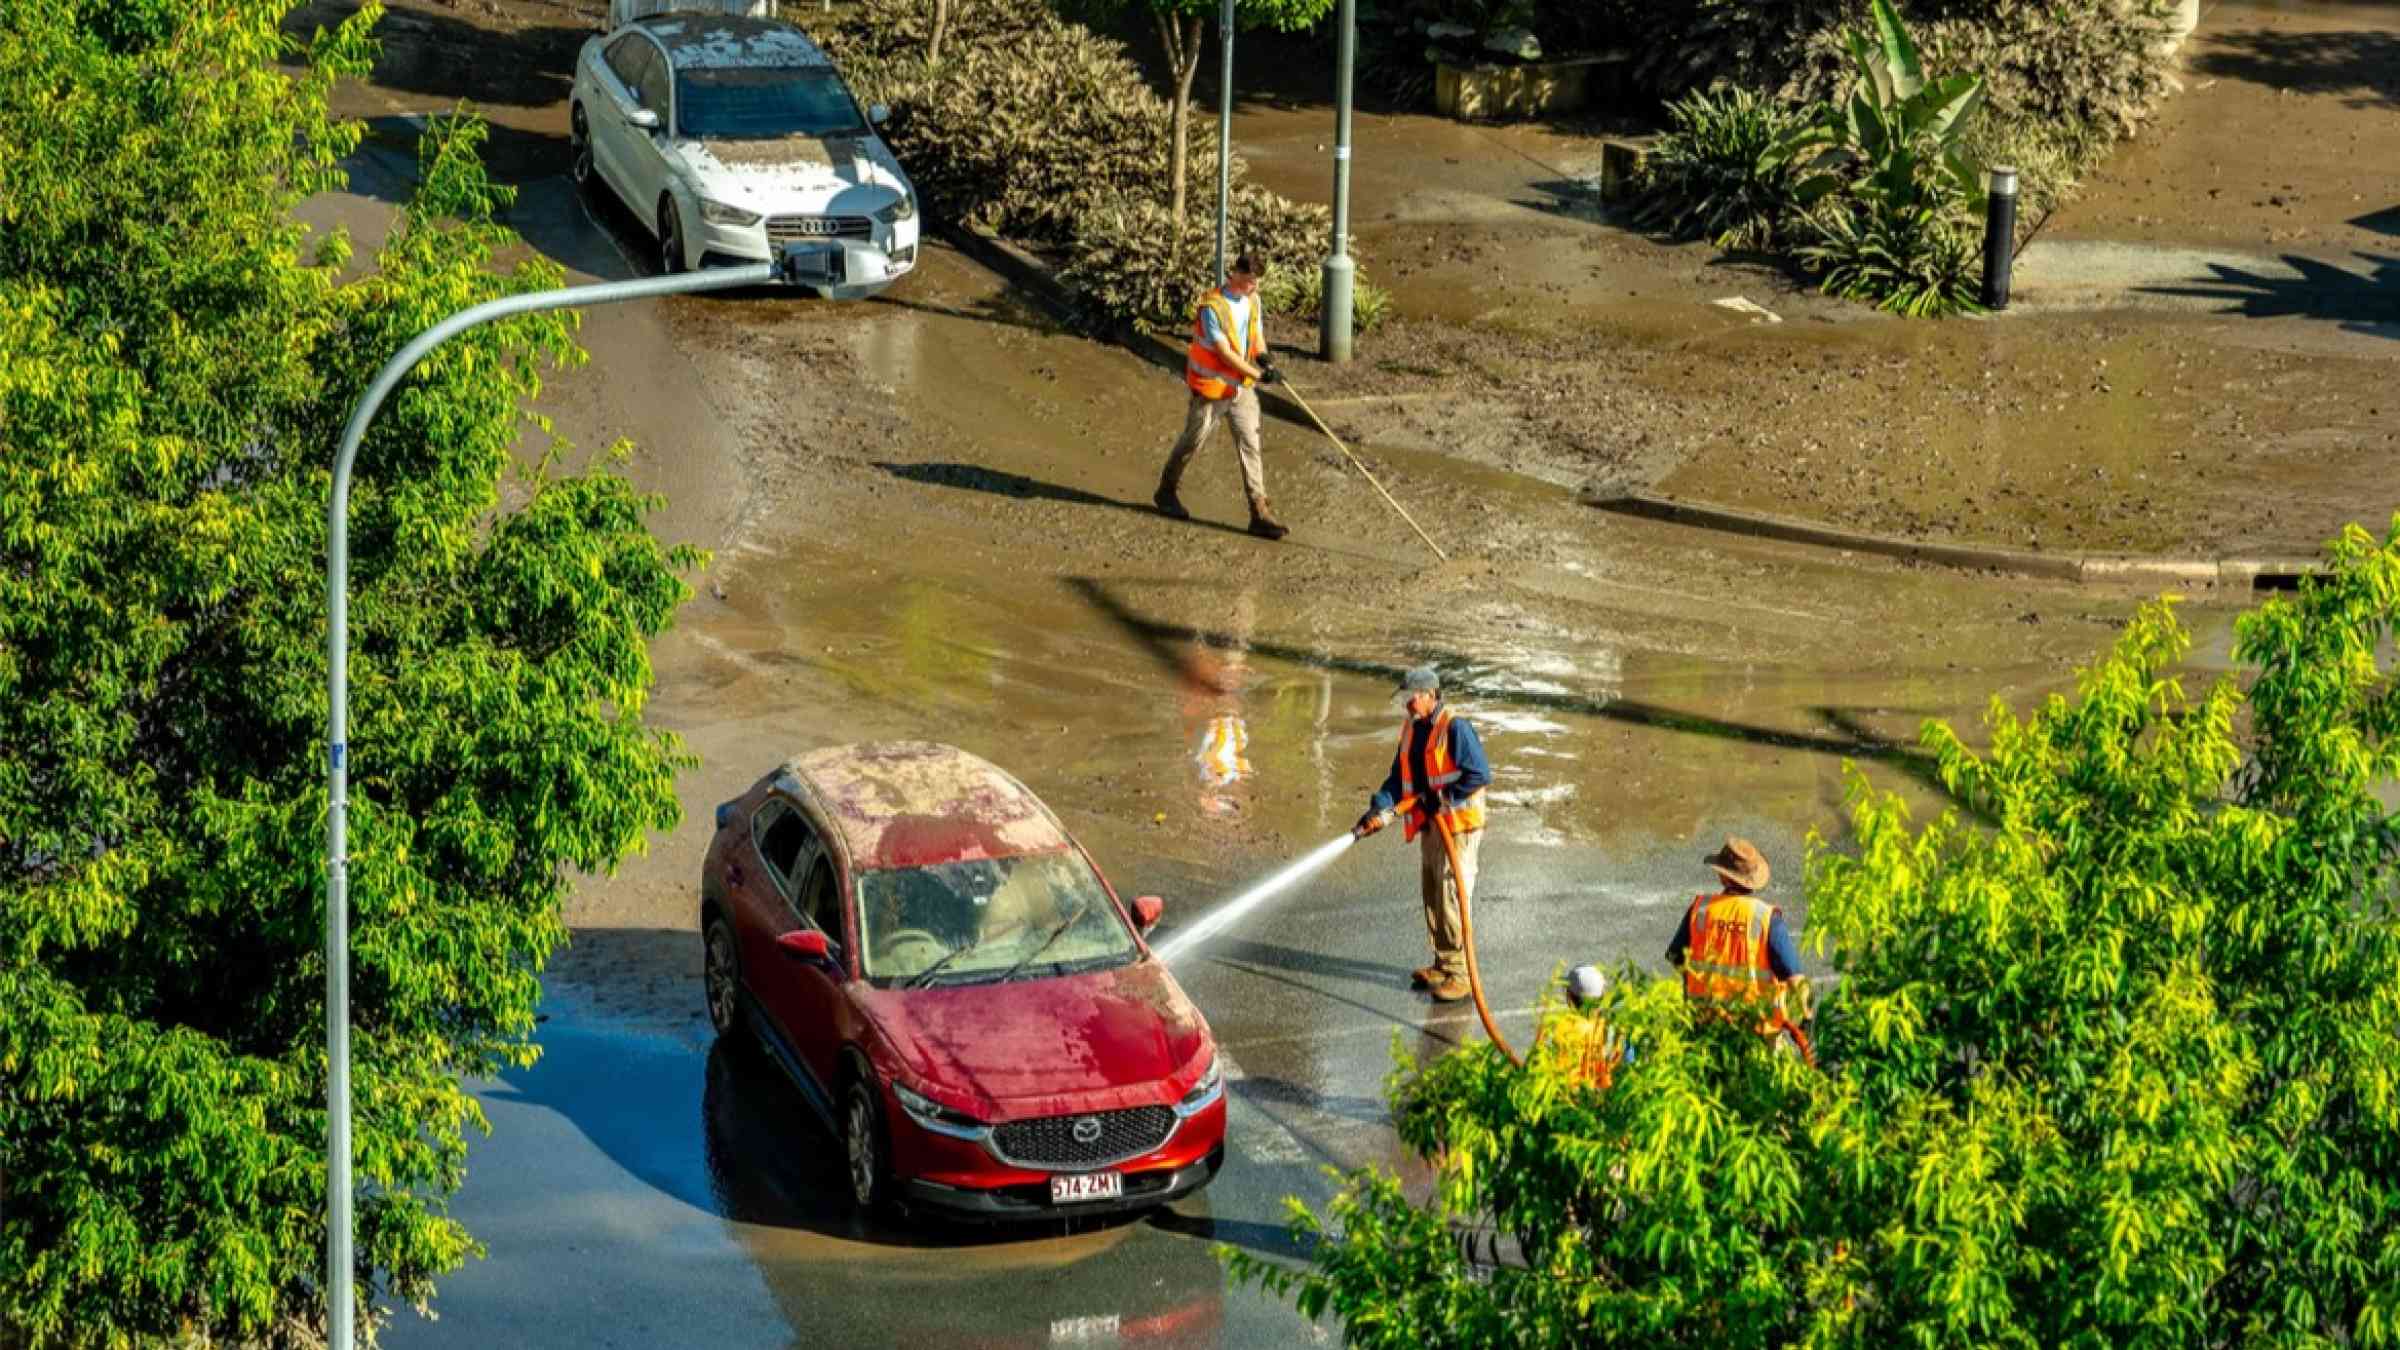 People cleaning up a muddy Brisbane street after the flood event